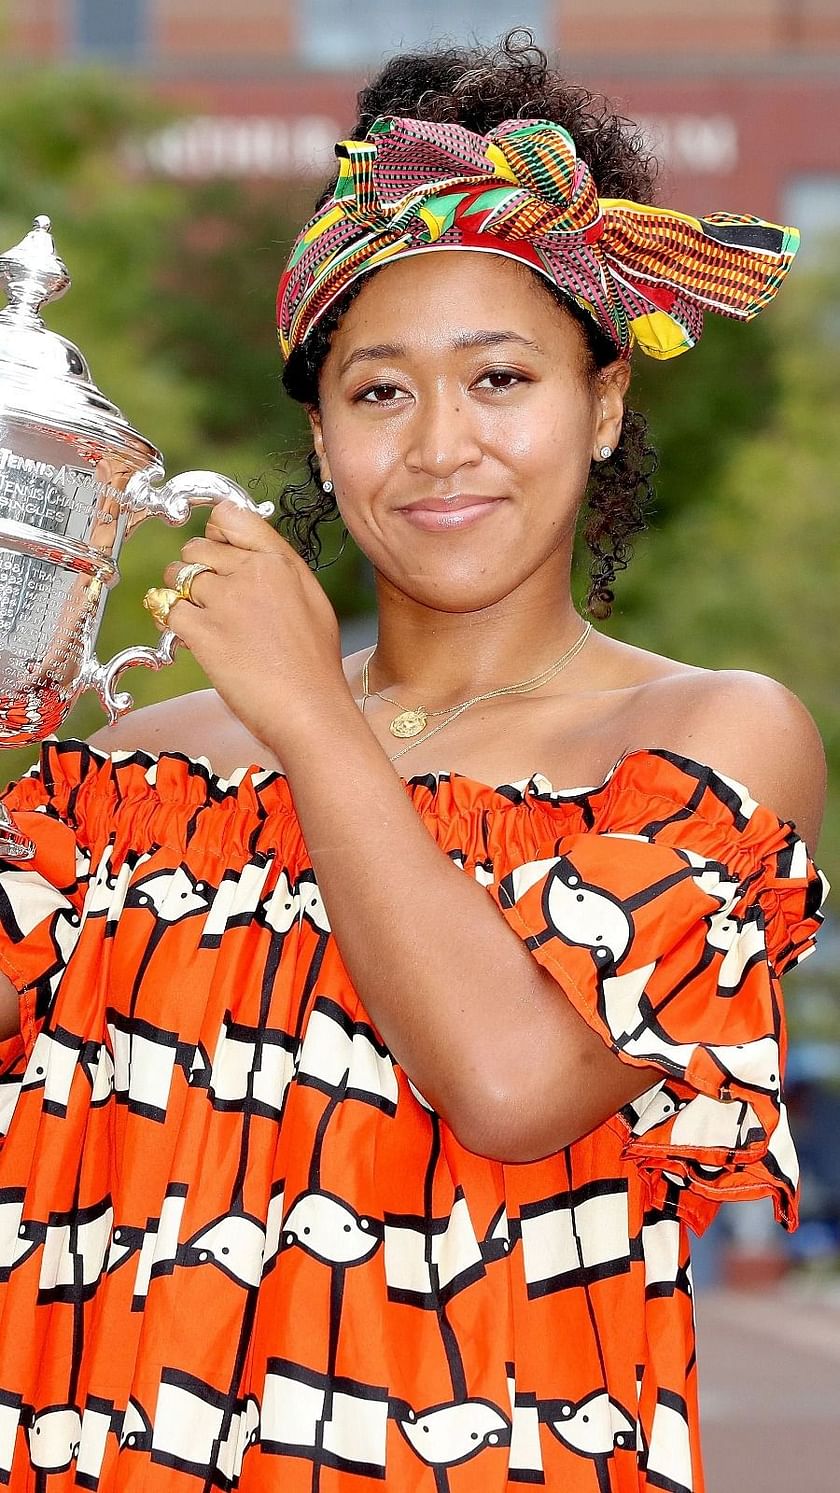 Naomi Osaka revealed as the new face of Louis Vuitton